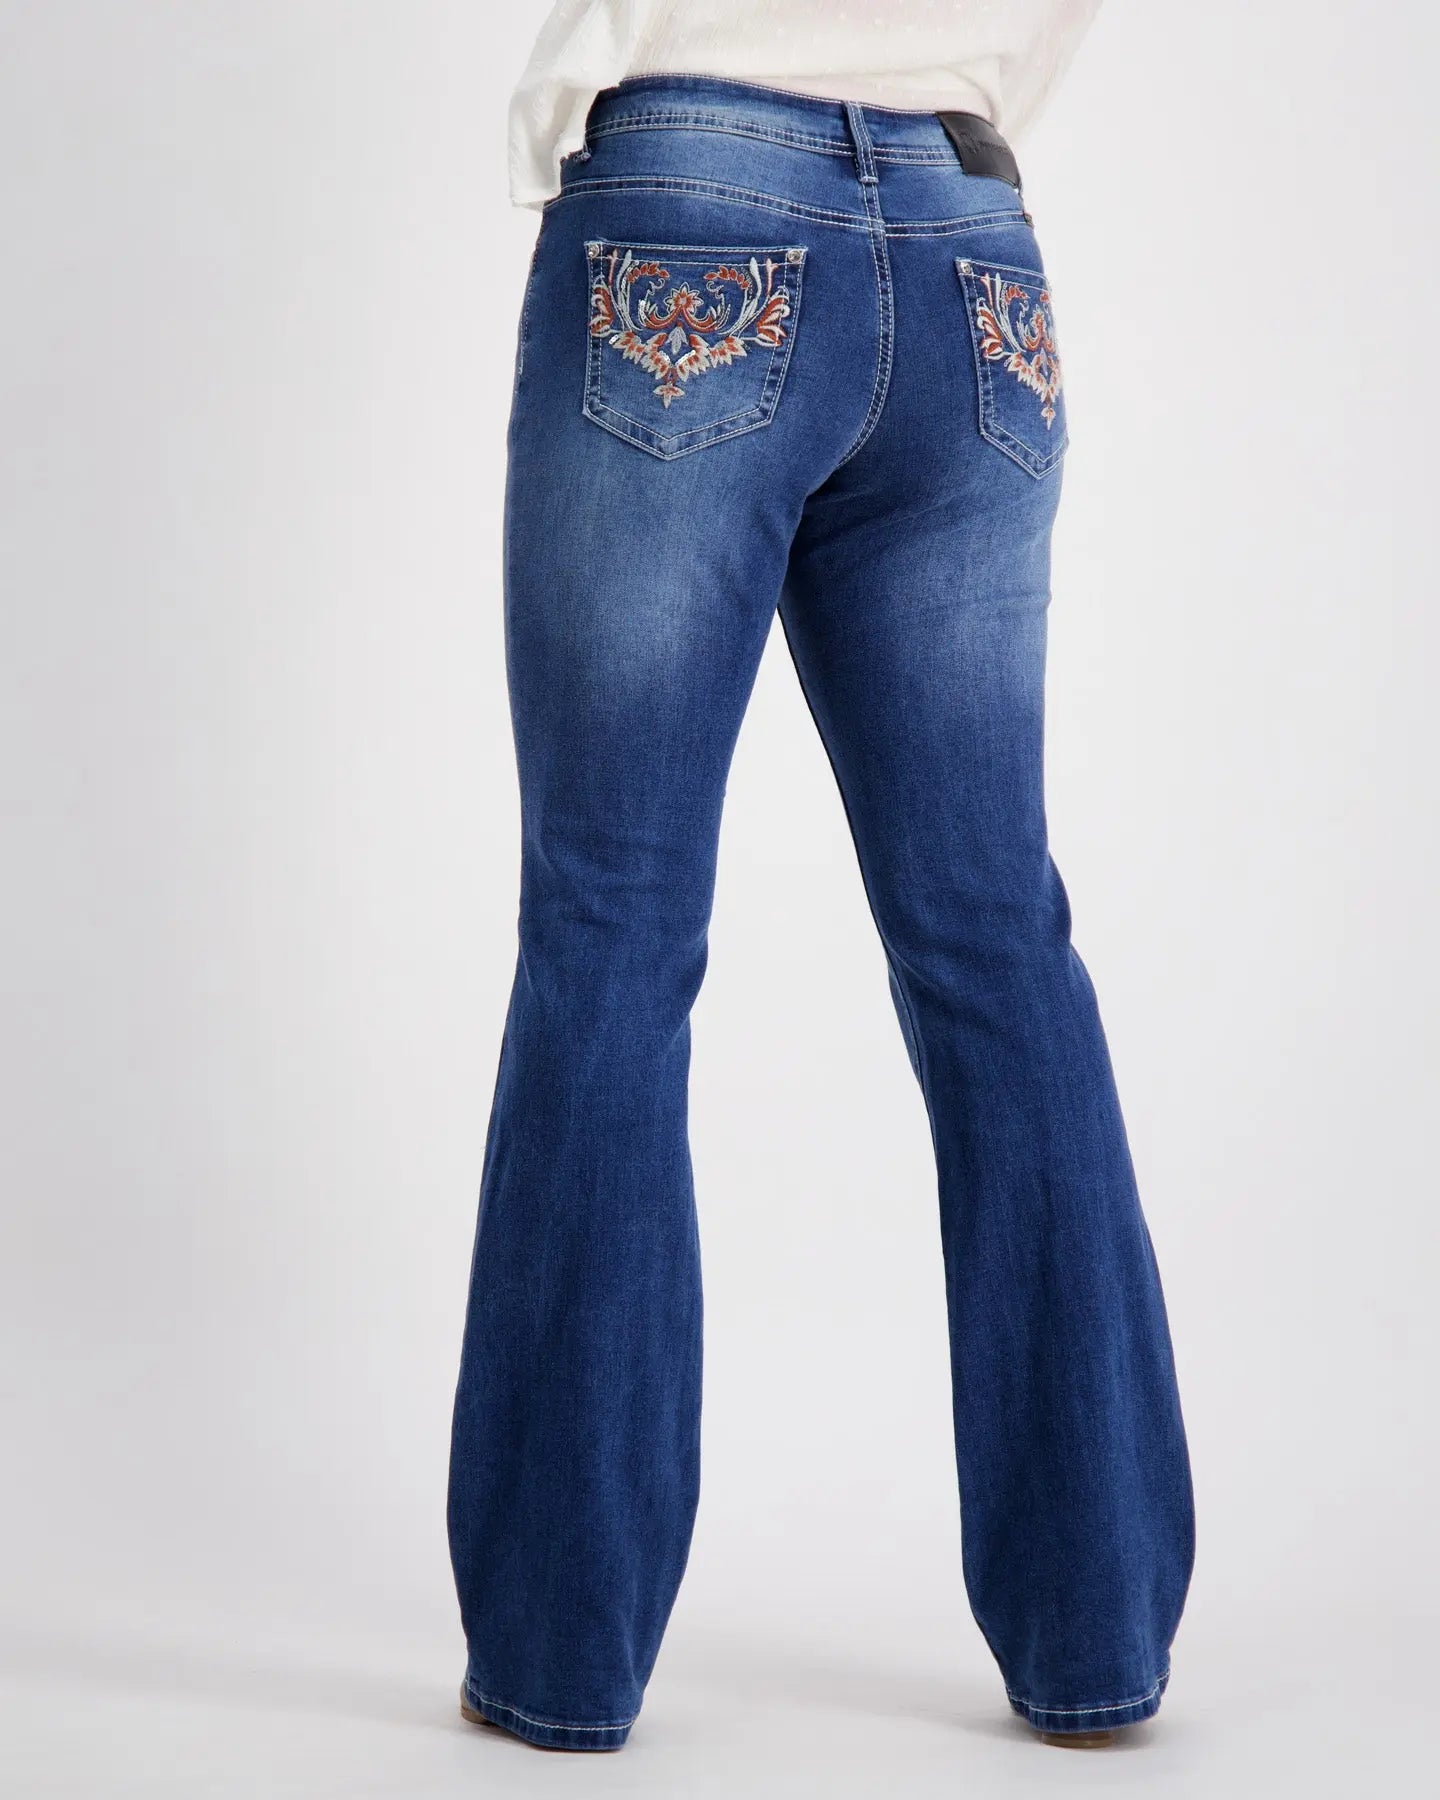 Jolene 2 Boot-Cut Jeans Outback Supply Co